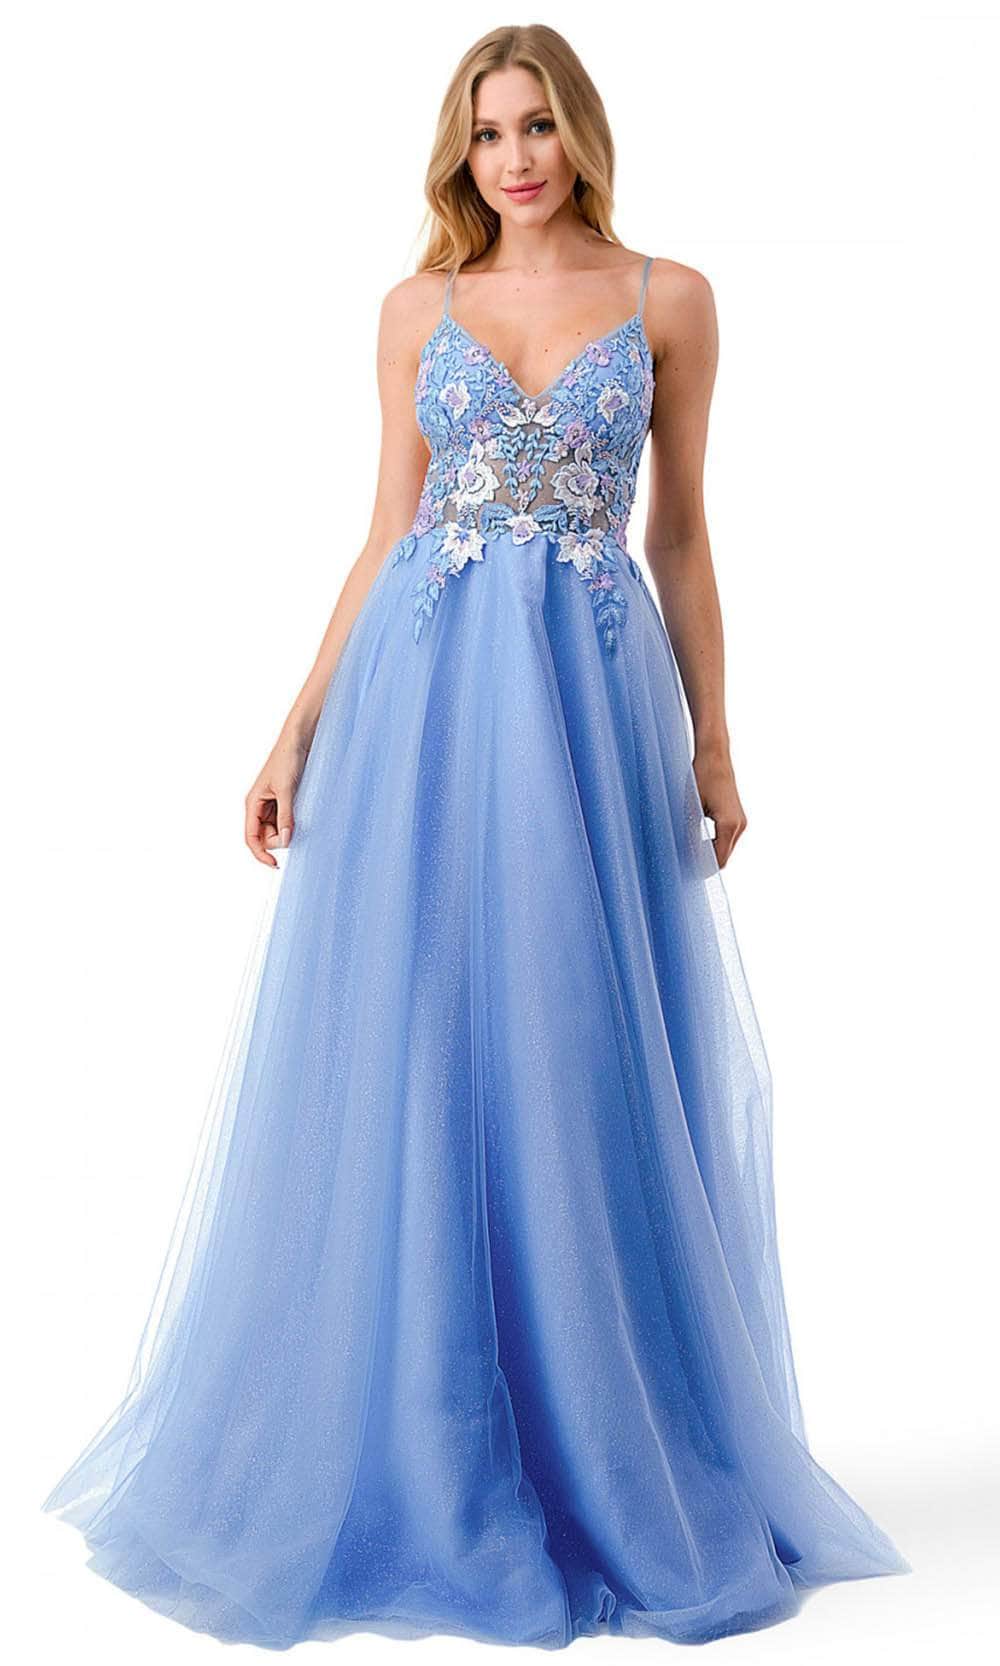 Aspeed Design Dresses, Aspeed Prom Dresses & Evening Gowns | Couture Candy